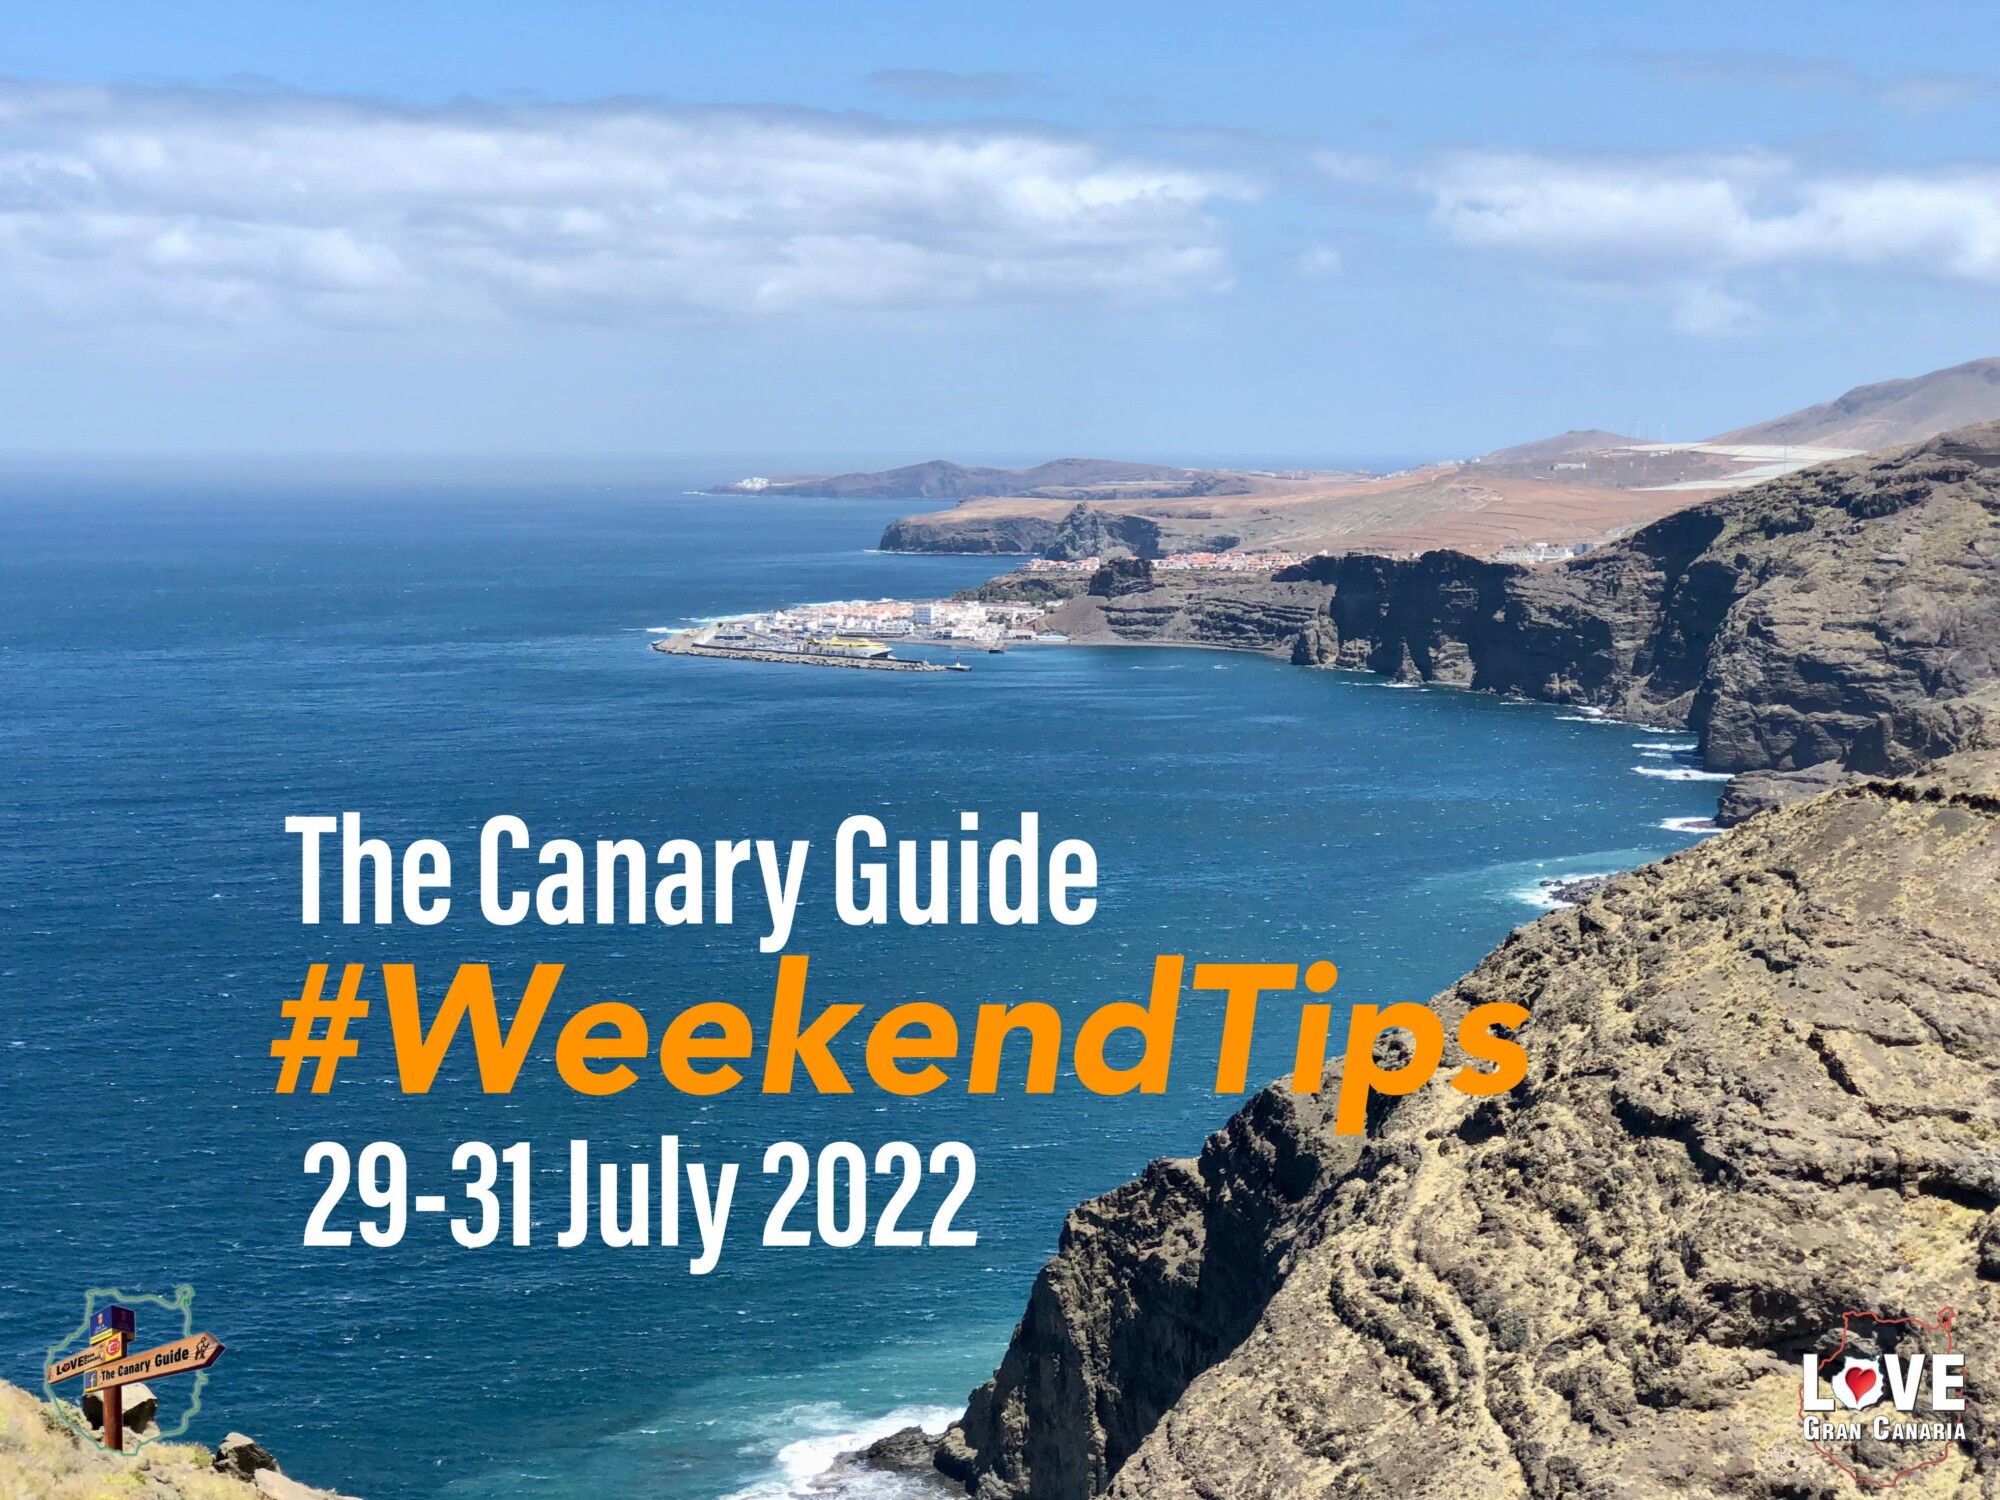 The Canary Guide #WeekendTips 29-31 July 2022